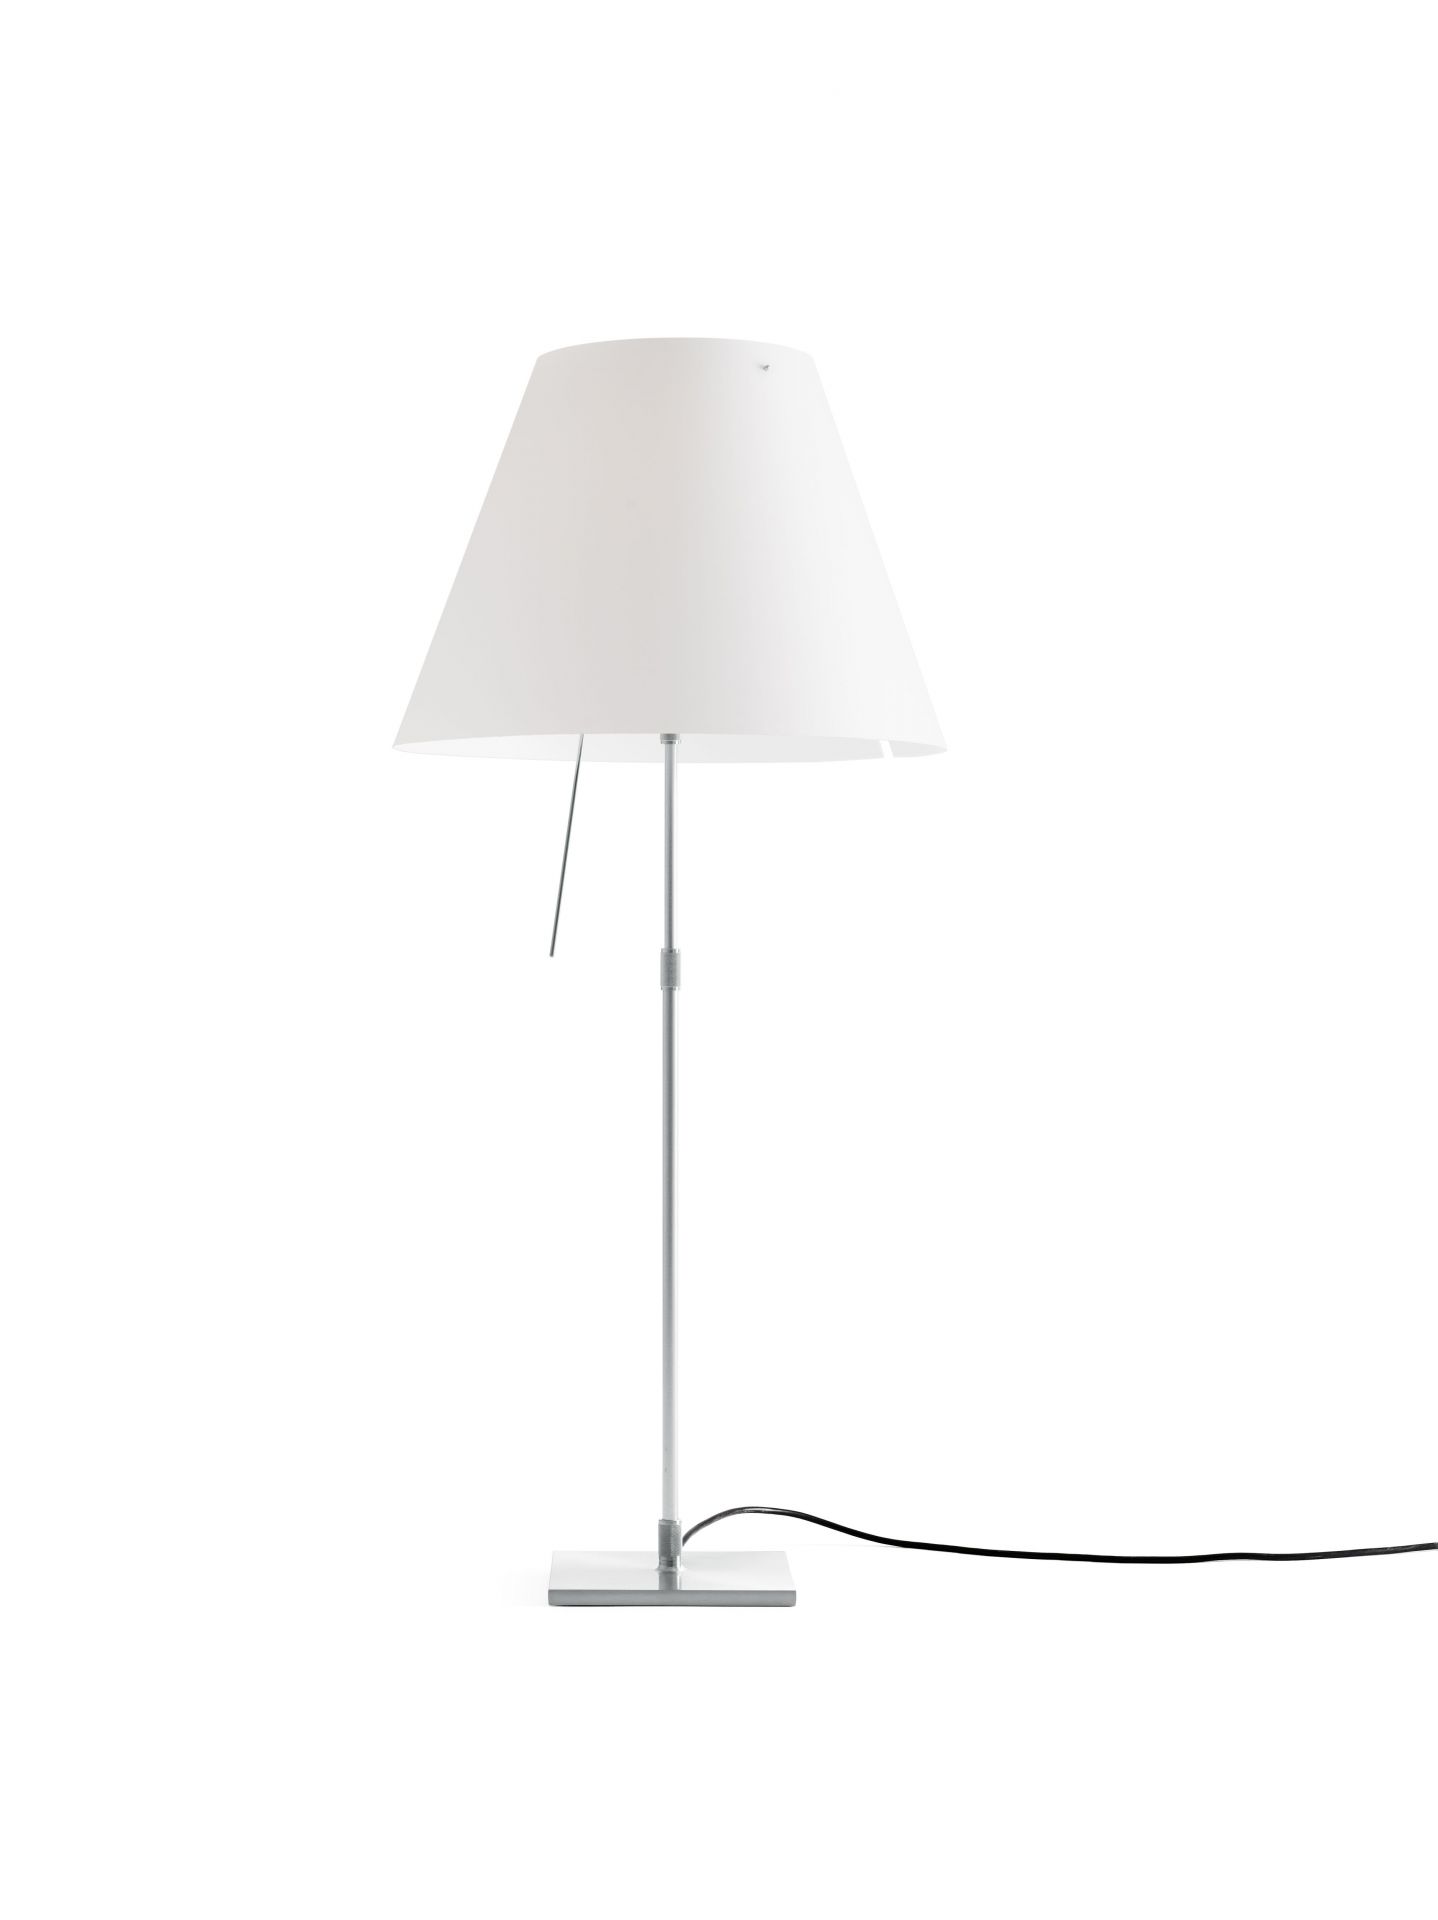 D13 Costanza height adjustable table lamp with sensor dimmer complete version aluminium base and white shade Luceplan